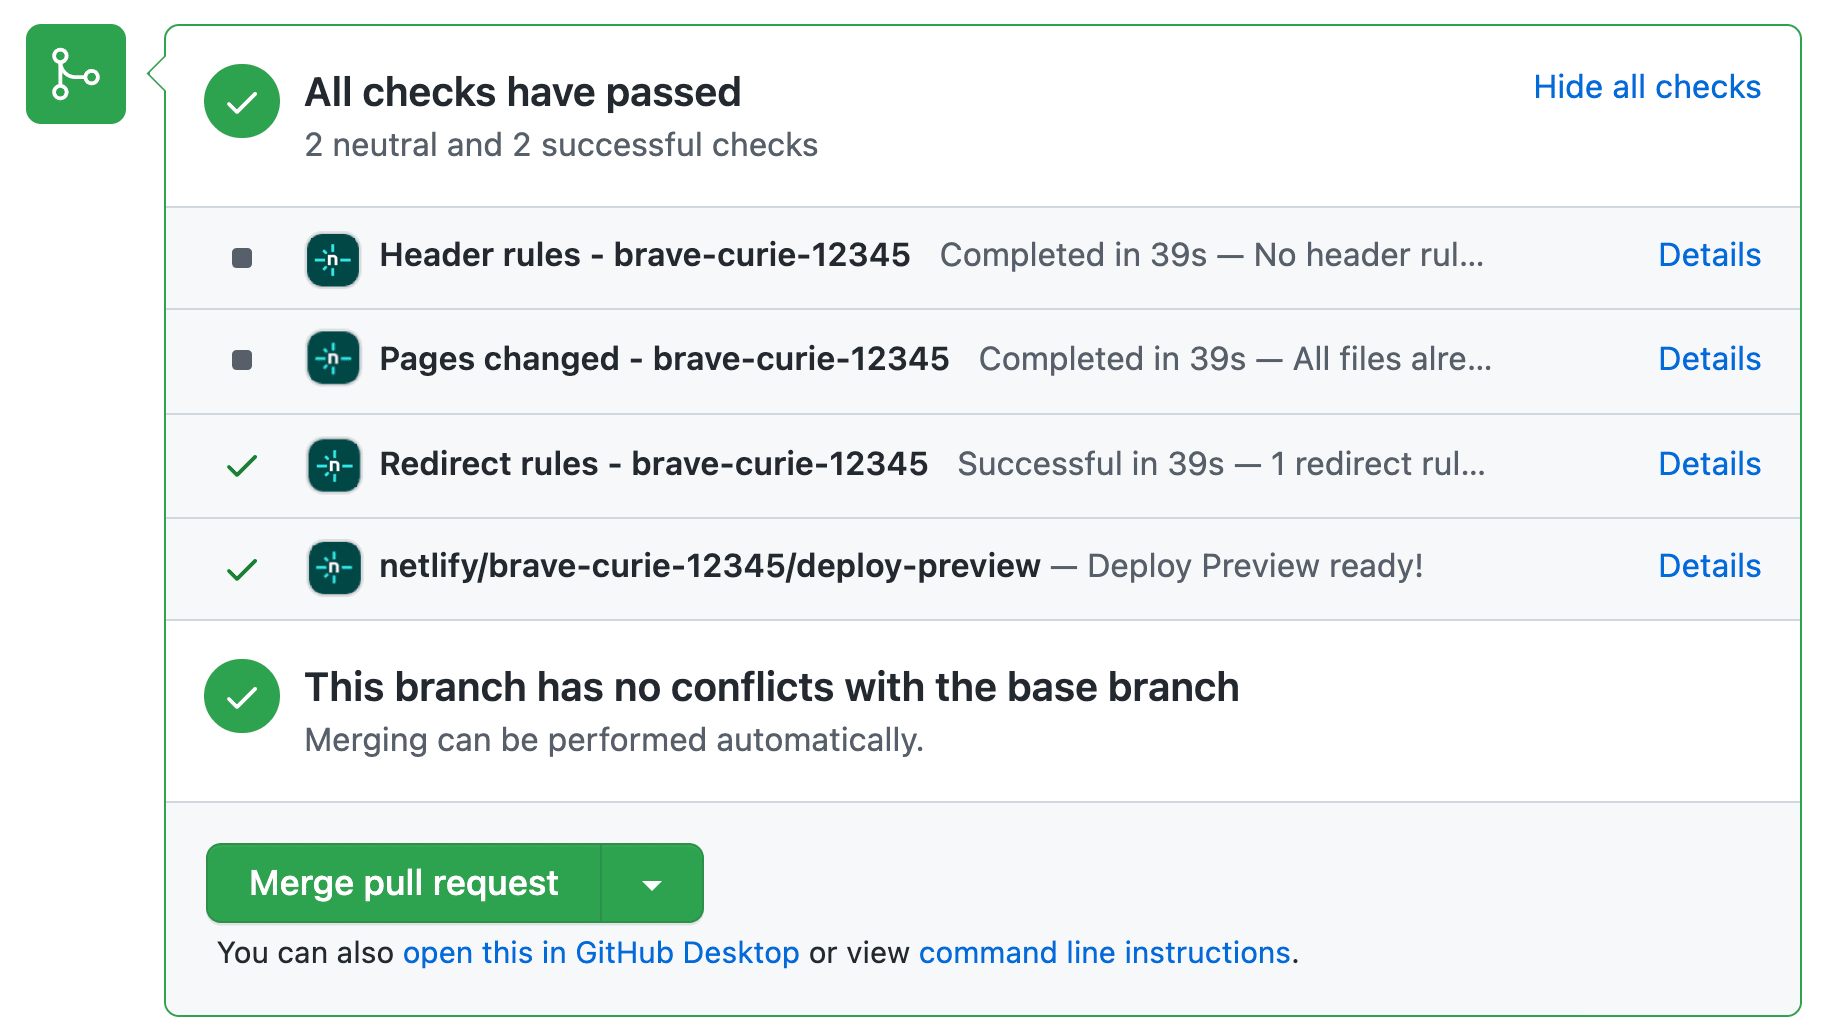 Commit checks for header rules, pages changed, redirect rules, deploy preview.